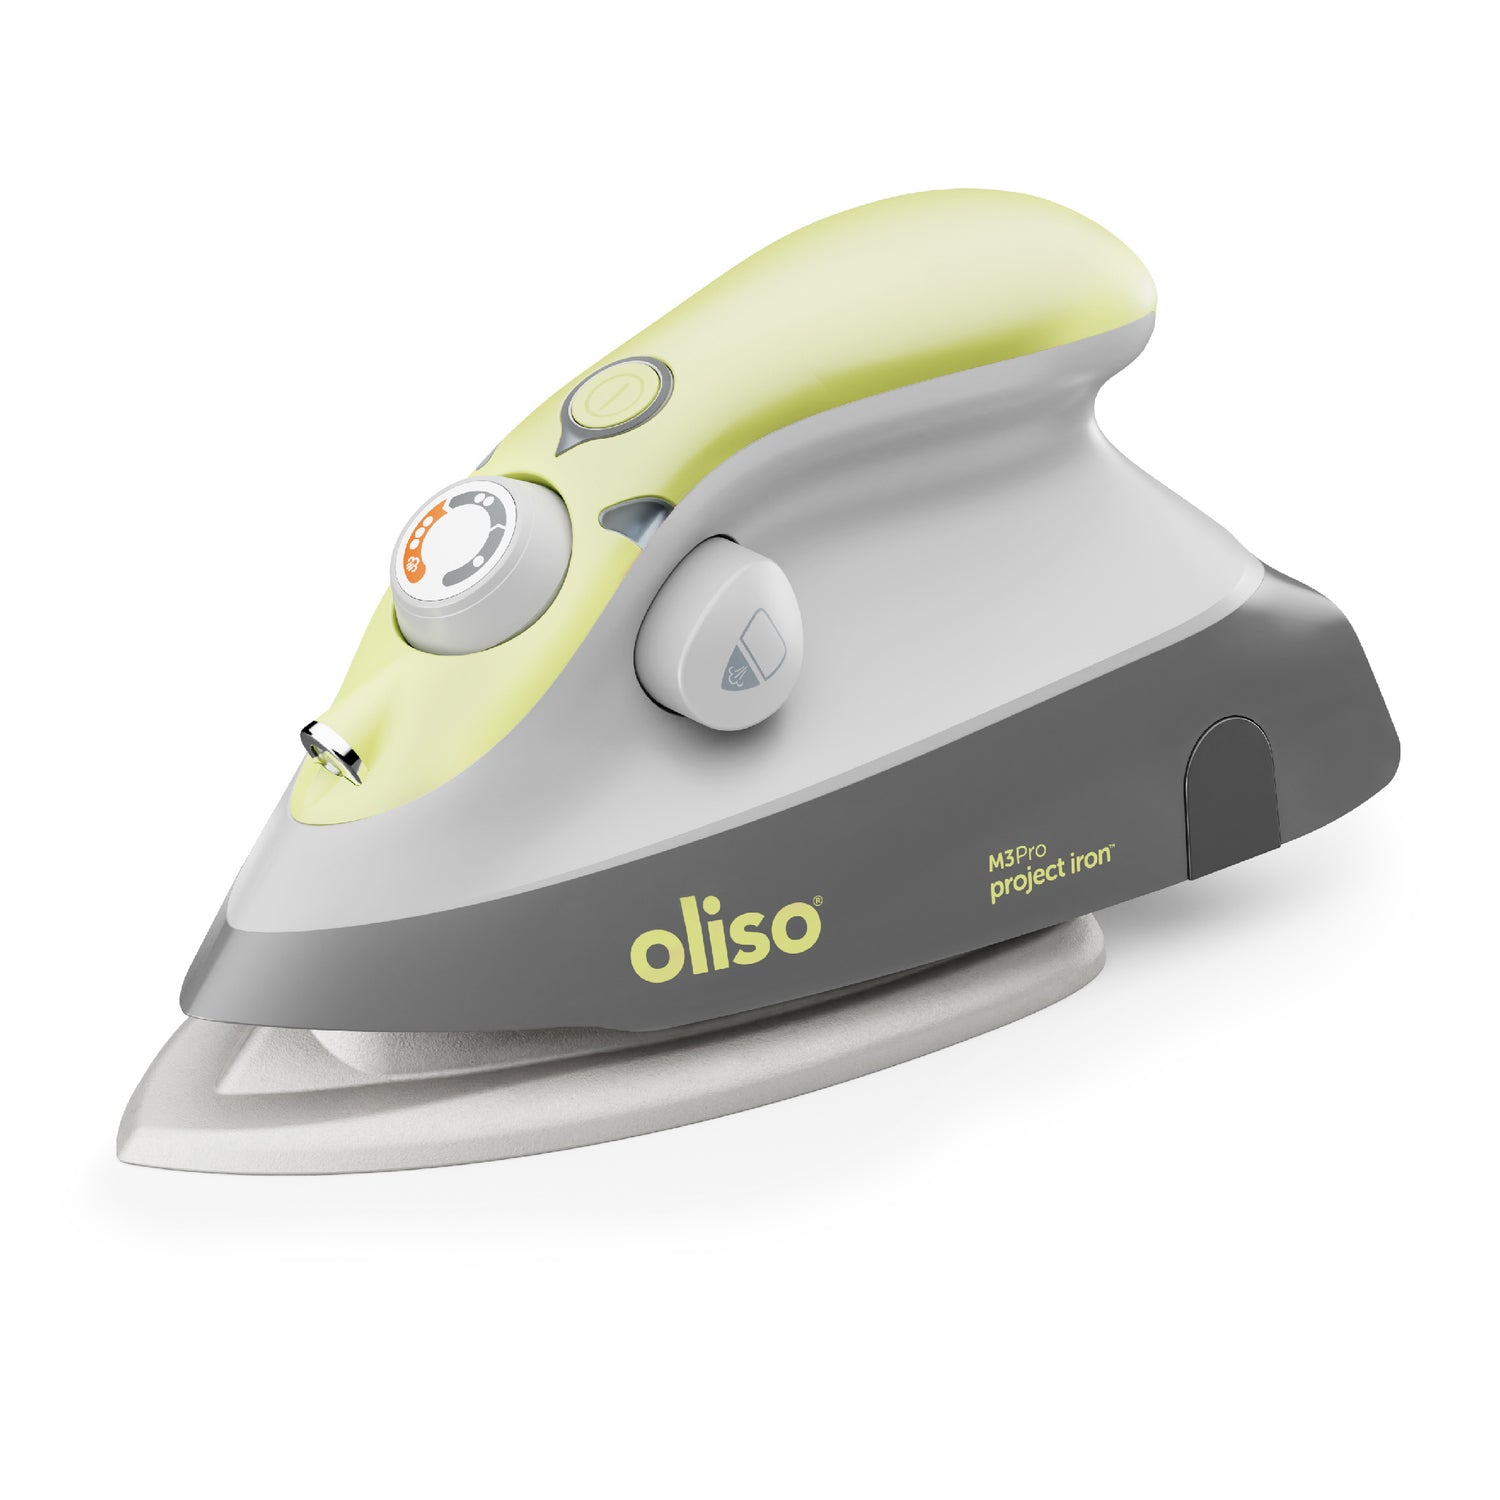 The  M3Pro project iron in pistachio provides full size power in a compact convenient size.